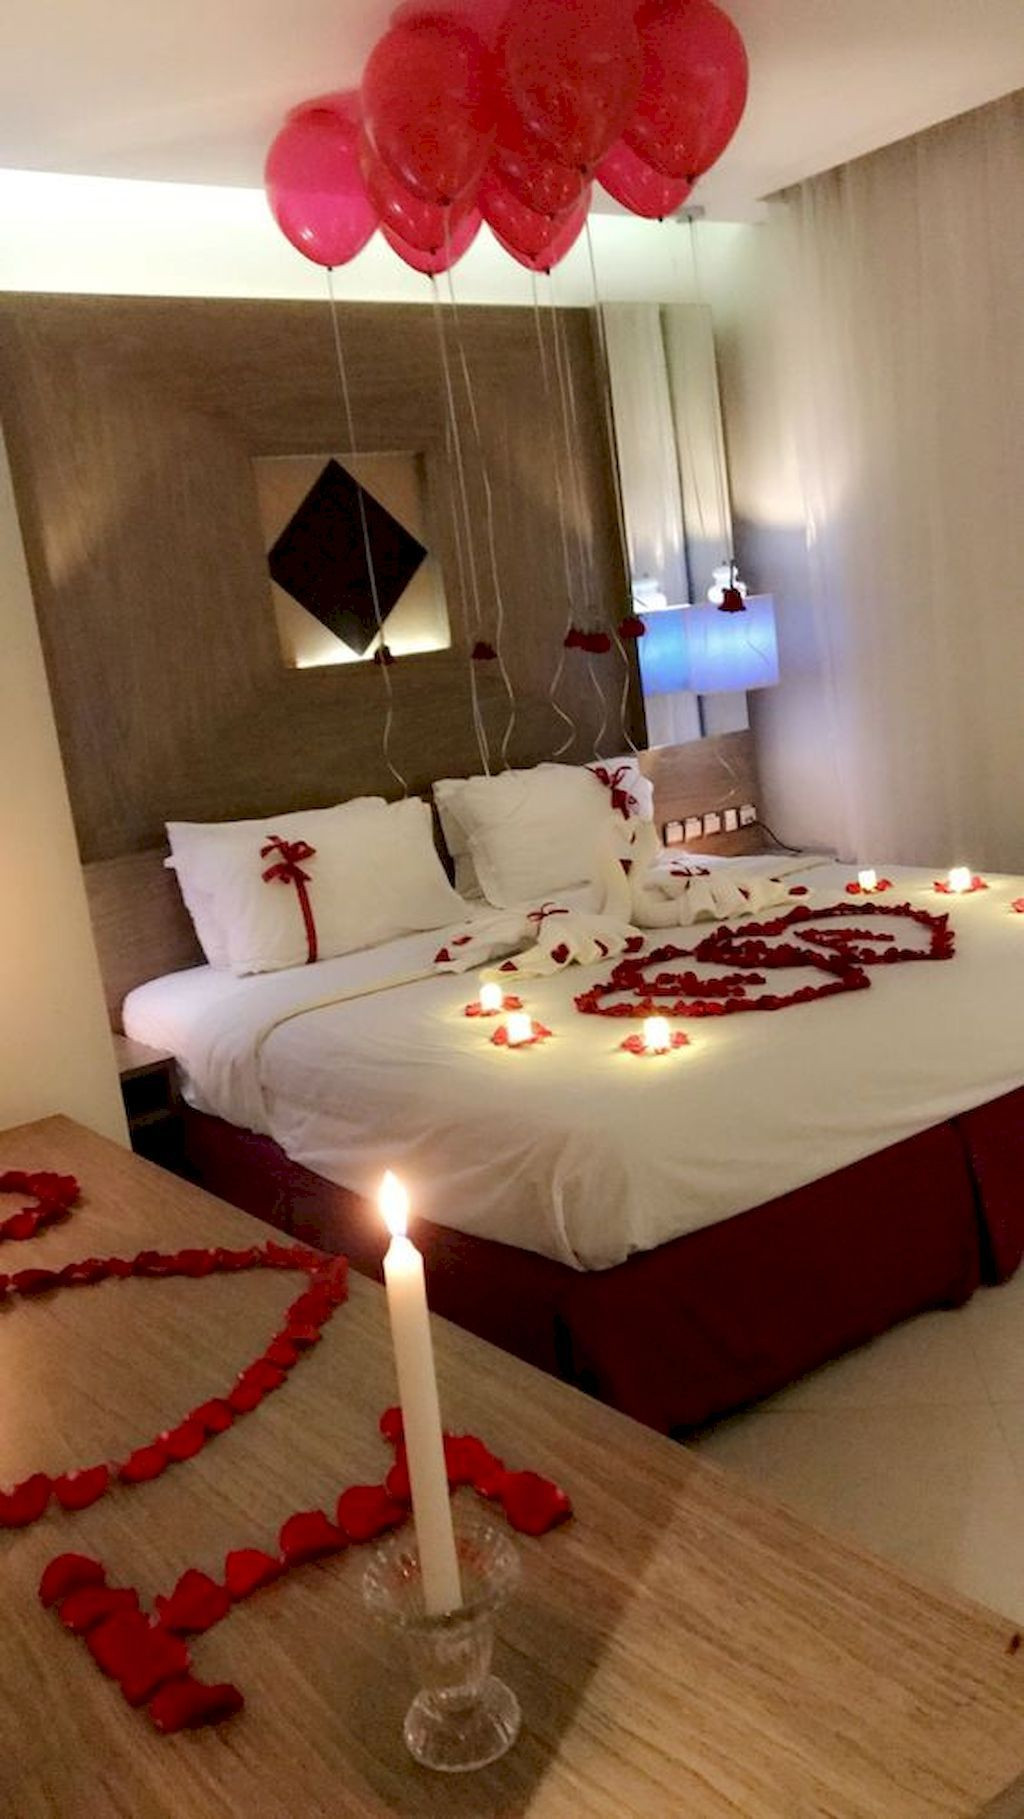 Romantic Bedroom Ideas For Valentines Day
 Romantic Bedroom Decorating Ideas Cheap For Valentines Day